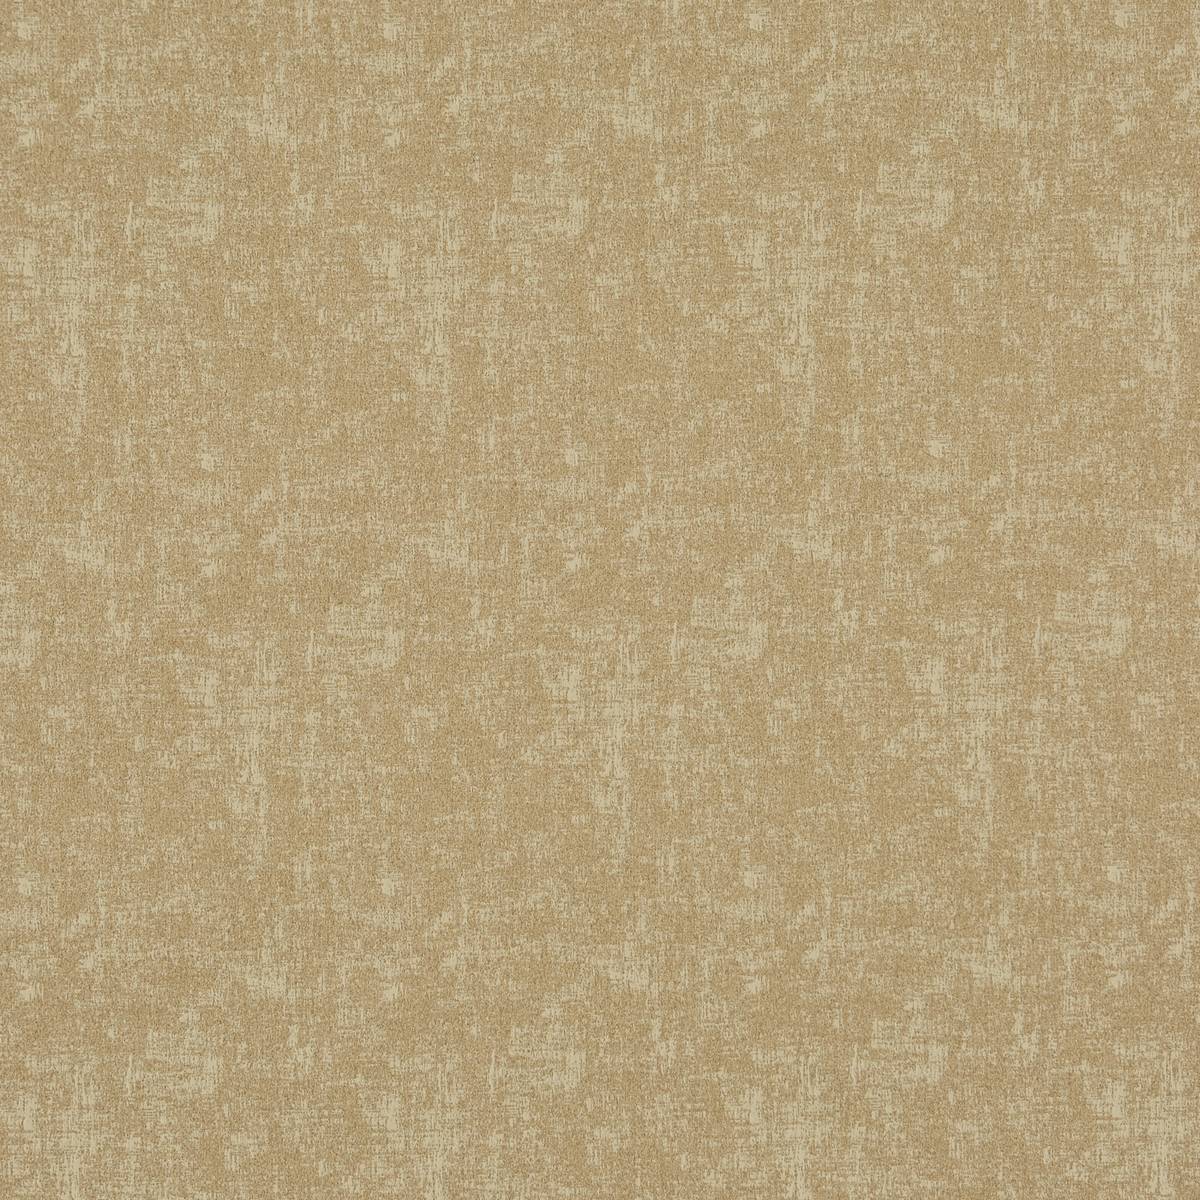 Muse Maize Fabric by Prestigious Textiles